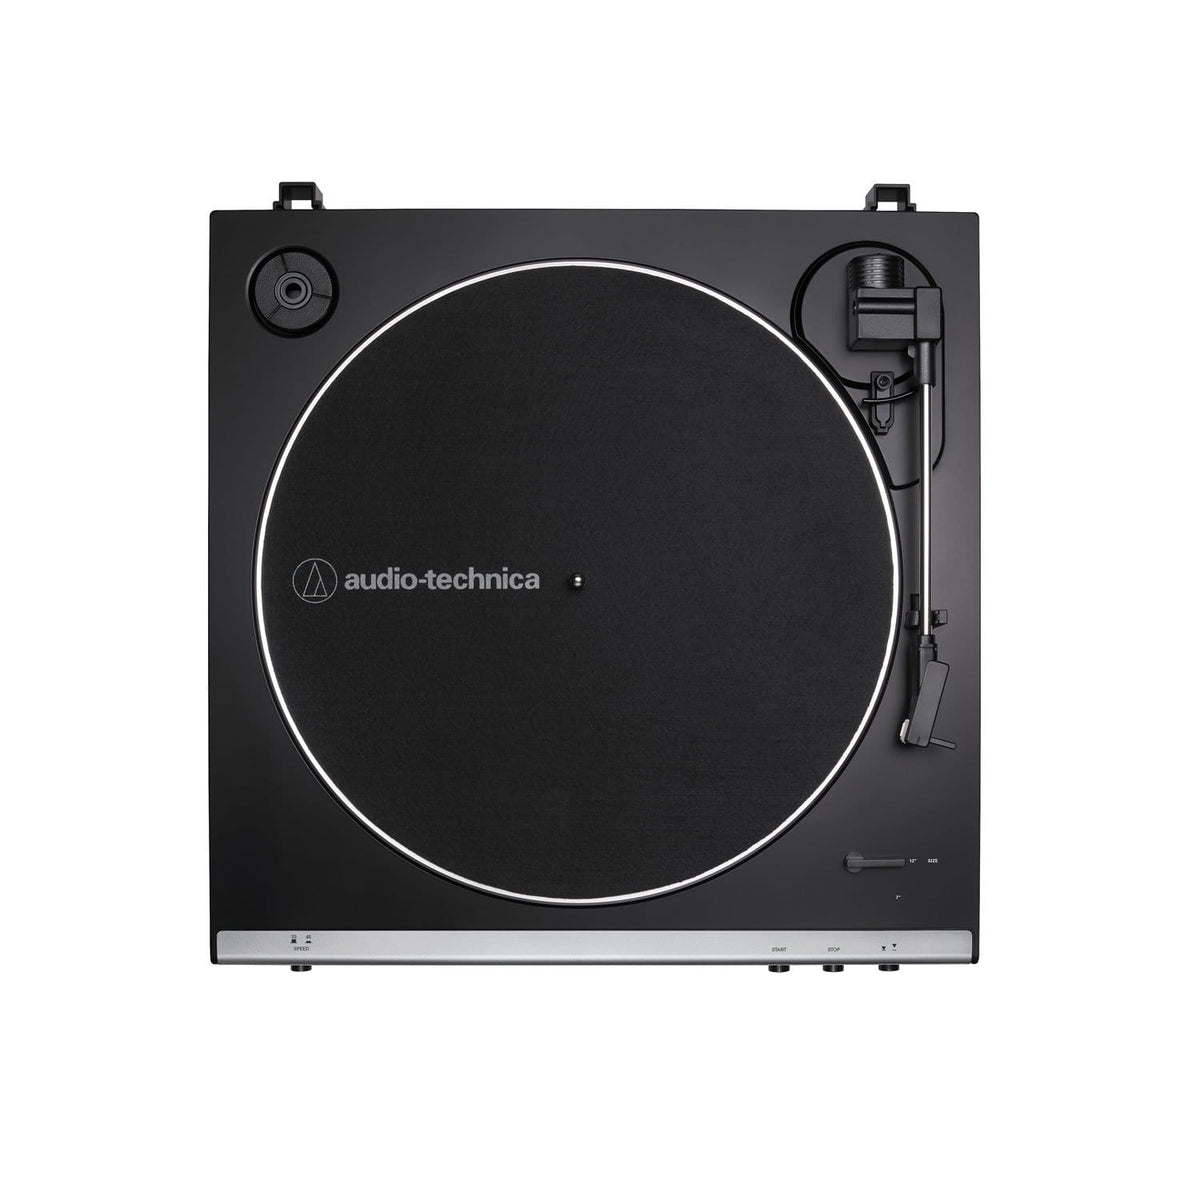 Audio Technica Recording Audio Technica Stereo Turntable with Bluetooth AT-LP60XBT - Byron Music